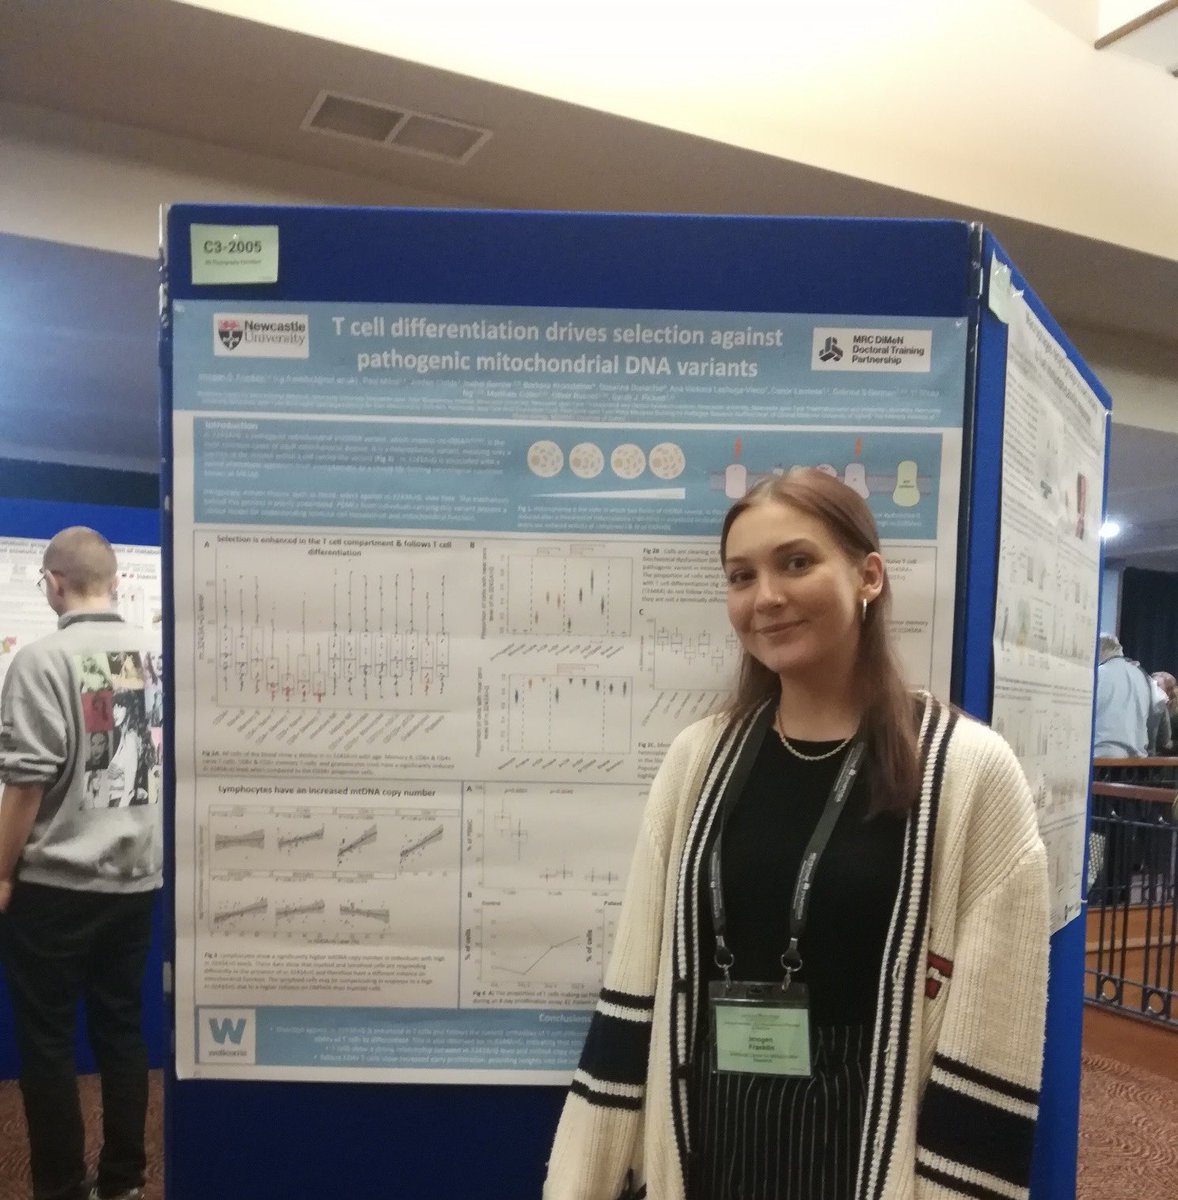 Really enjoying my first ever immunometabolism conference. Thanks to everyone who came to chat at my poster last night! @KeysSymp #immunometabolism